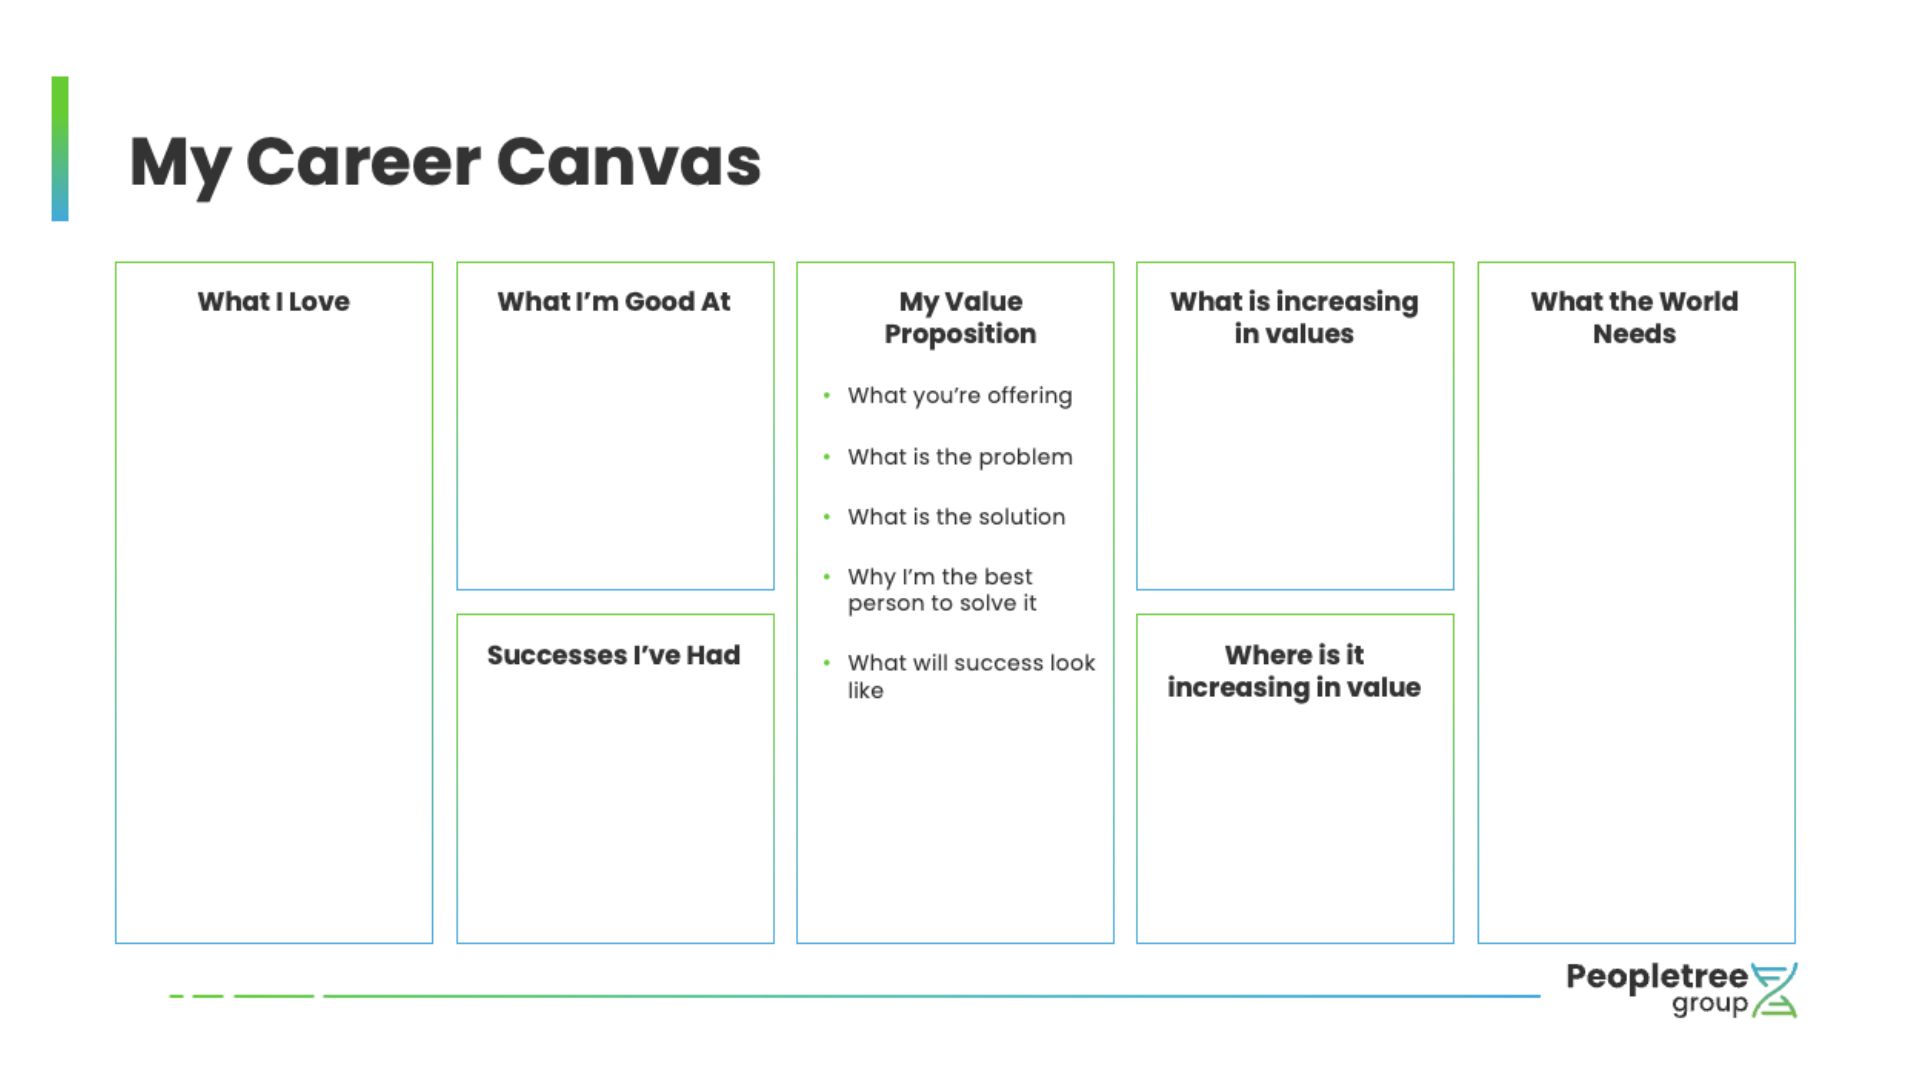 Framework for career planning including sections for What I Love, What I’m Good At, My Value Proposition, Successes I’ve Had, What is increasing in values, Where is it increasing in value, and What the World Needs.